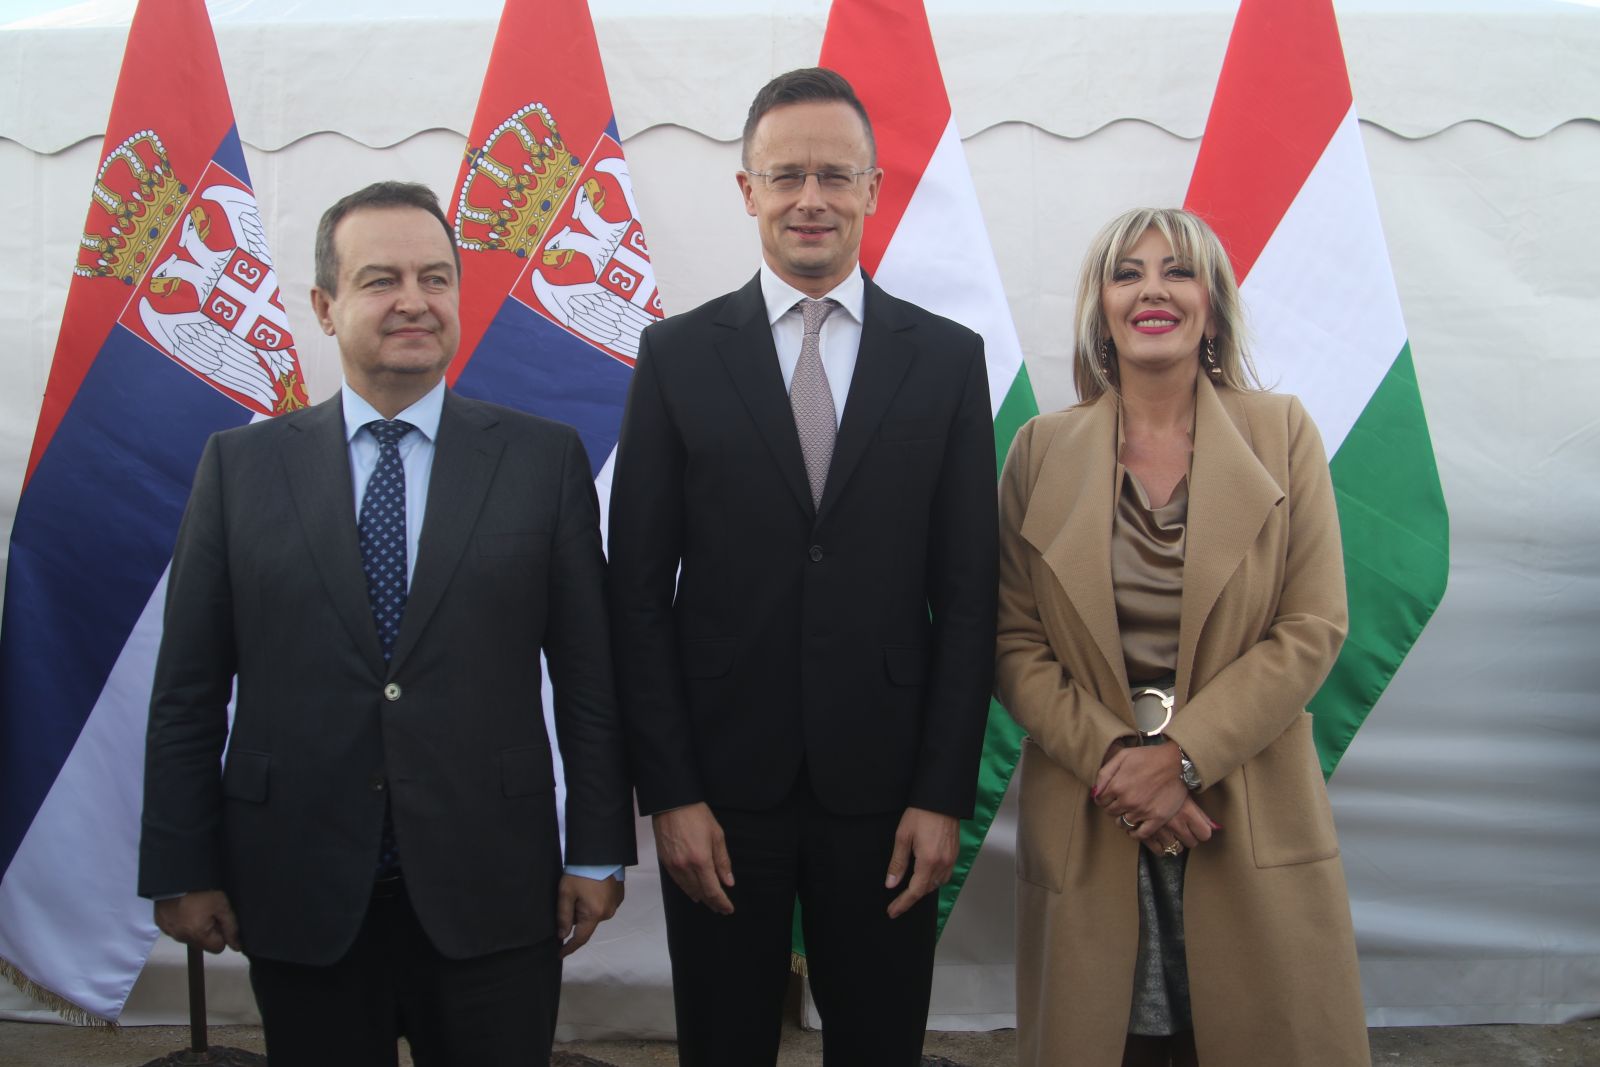 J. Joksimović: The new border crossing is evidence of carrying for the interests of citizens